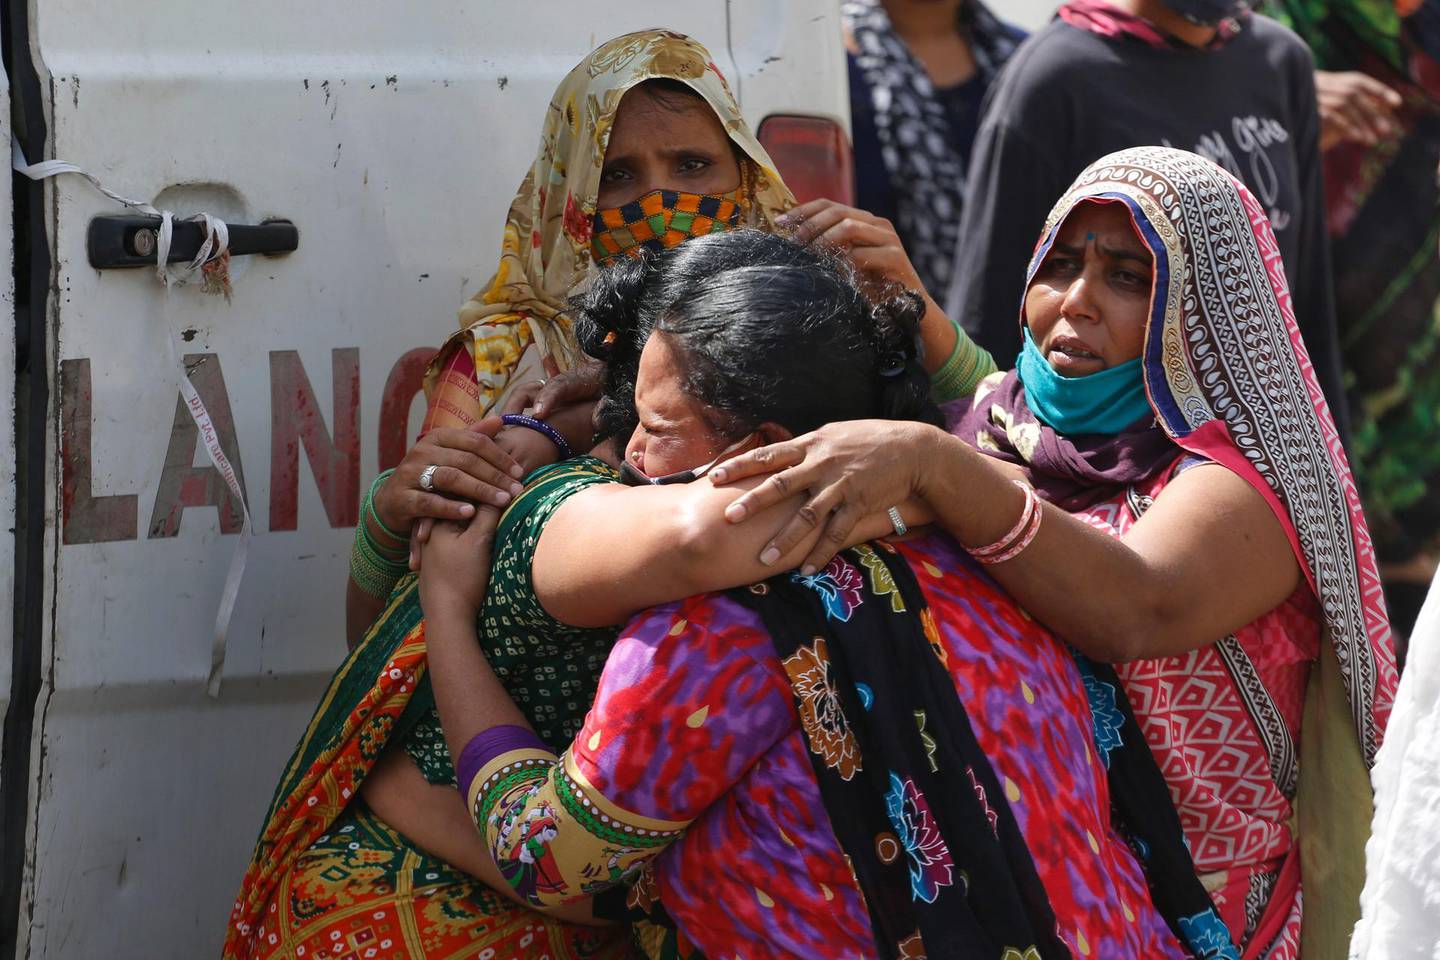 Relatives of a patient who died of COVID-19, mourn outside a dedicated COVID-19 government hospital in Ahmedabad, India, Saturday, April 17, 2021. The global death toll from the coronavirus topped a staggering 3 million people Saturday amid repeated setbacks in the worldwide vaccination campaign and a deepening crisis in places such as Brazil, India and France. (AP Photo/Ajit Solanki)